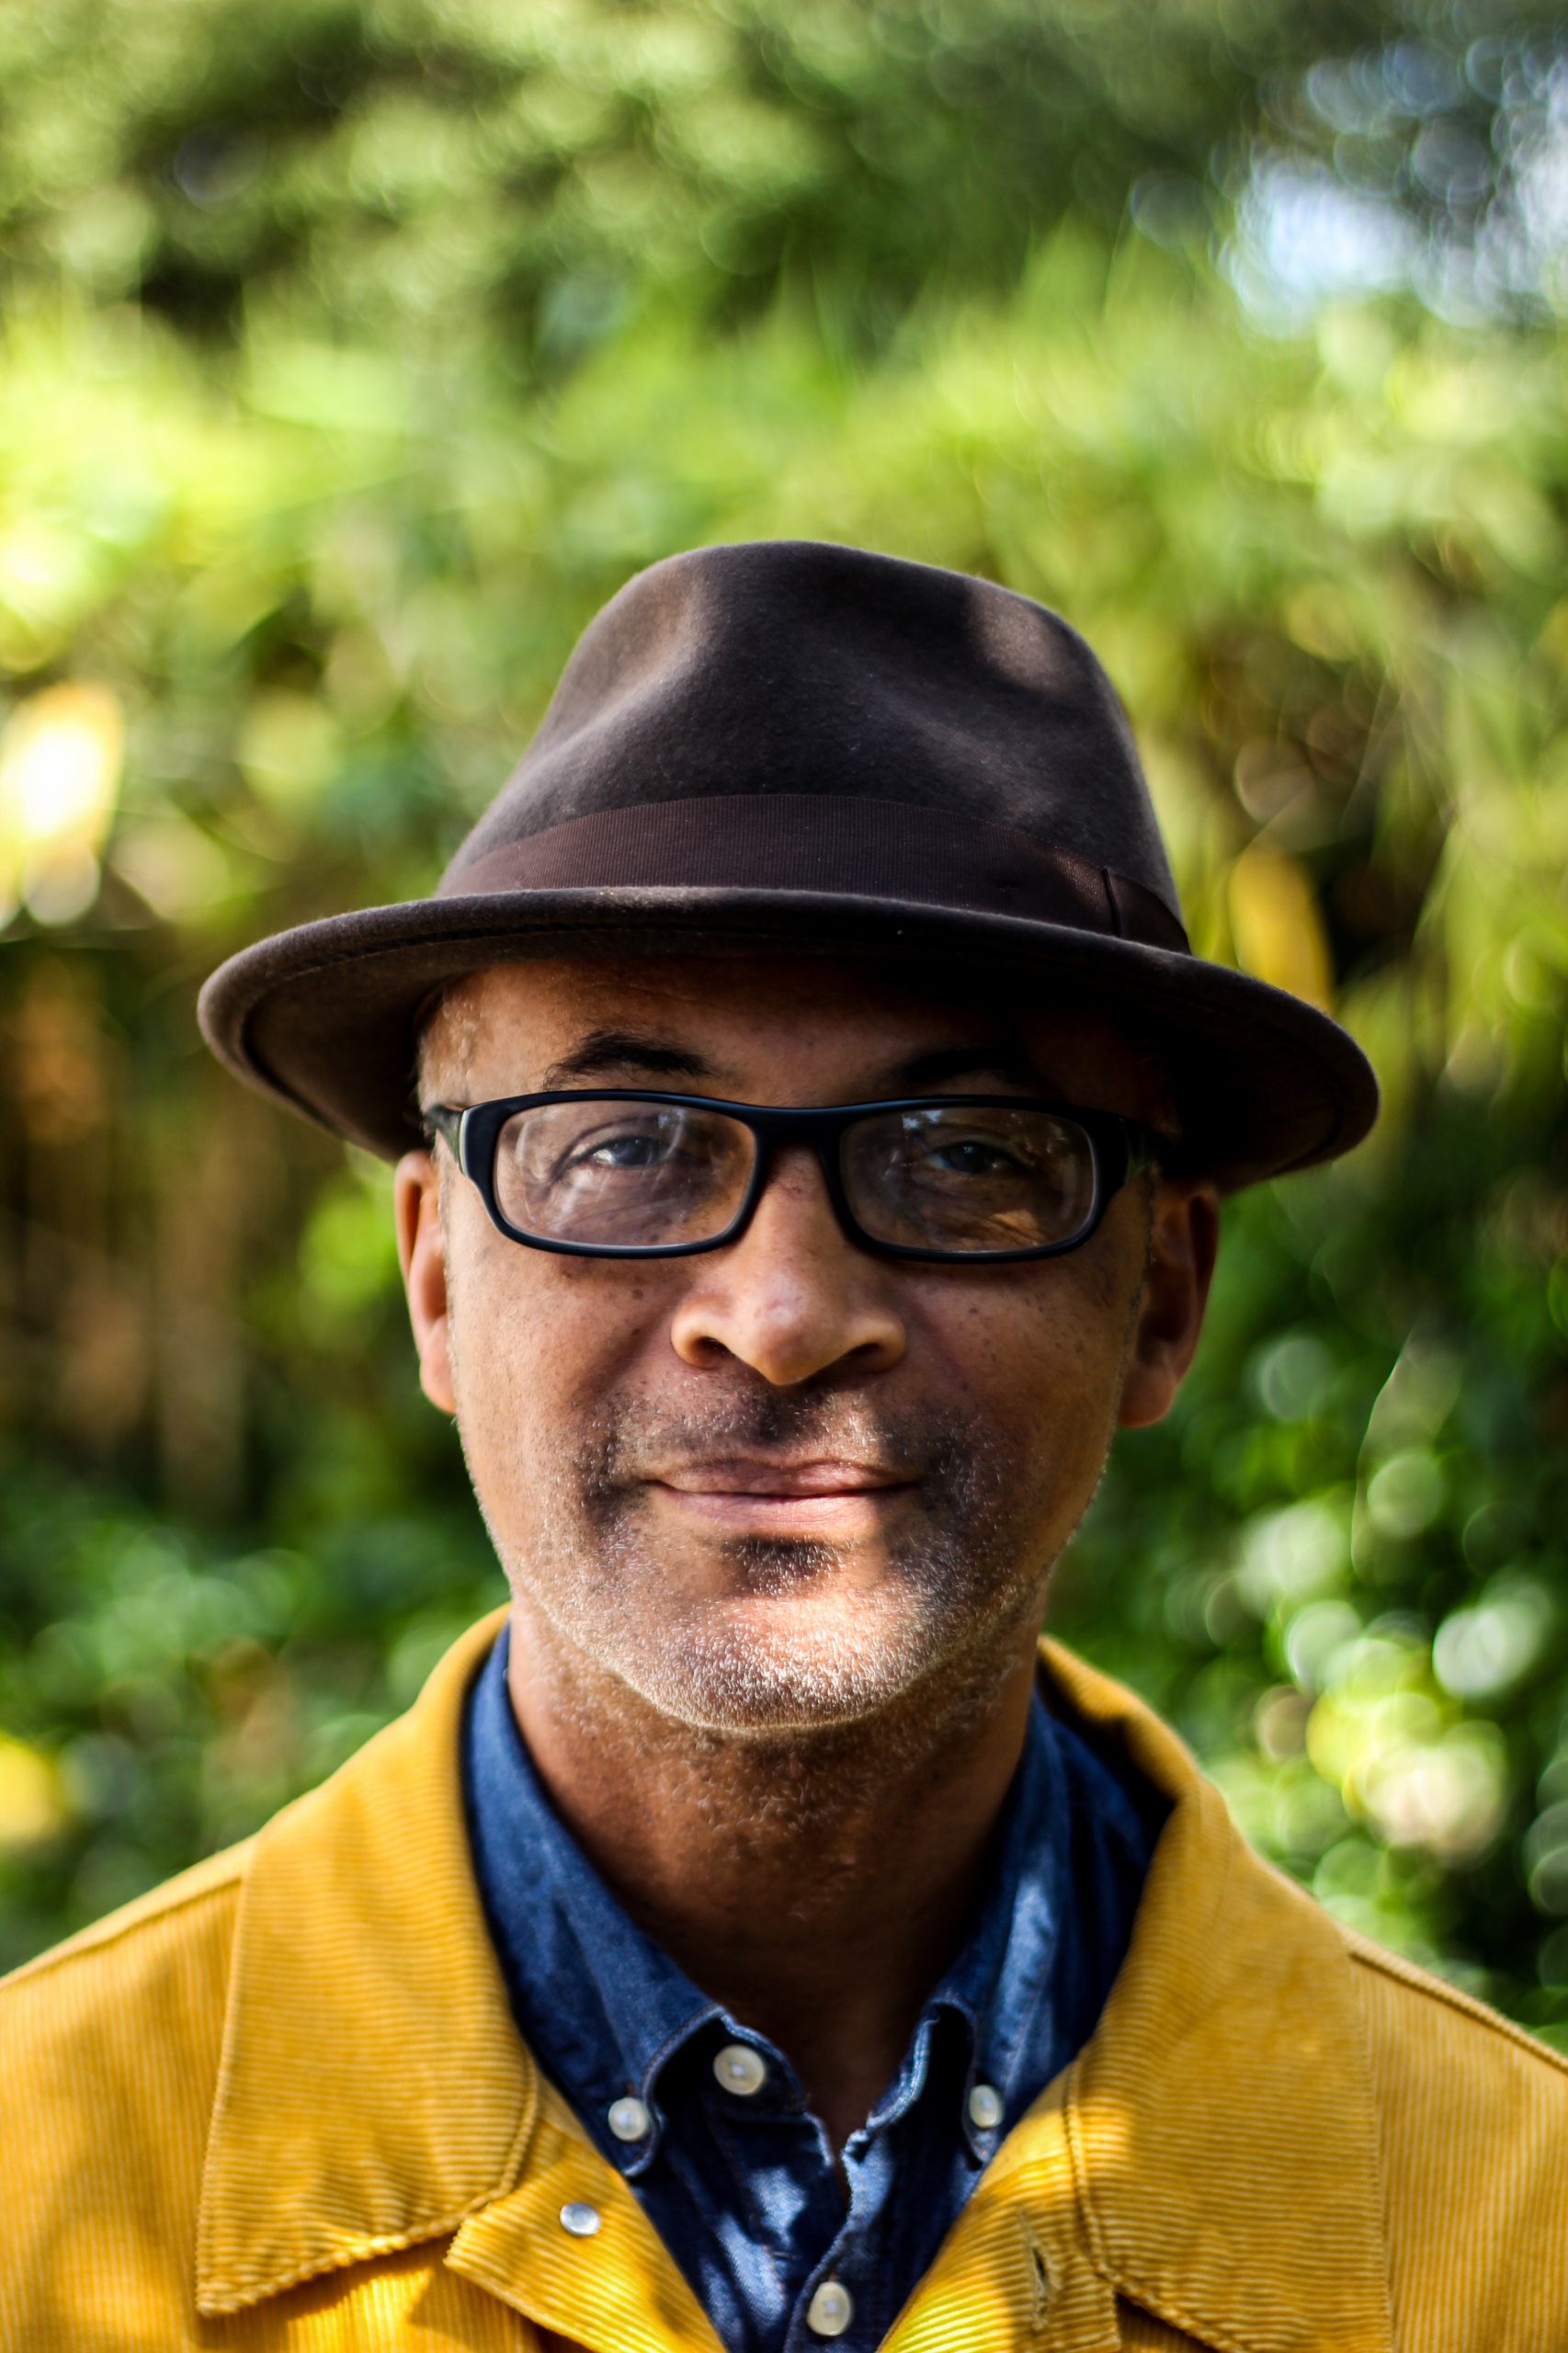 An image of the Black writer Colin Grant taken outside. He is wearing glasses and is sporting a brown hat, blue shirt and yellow jacket.